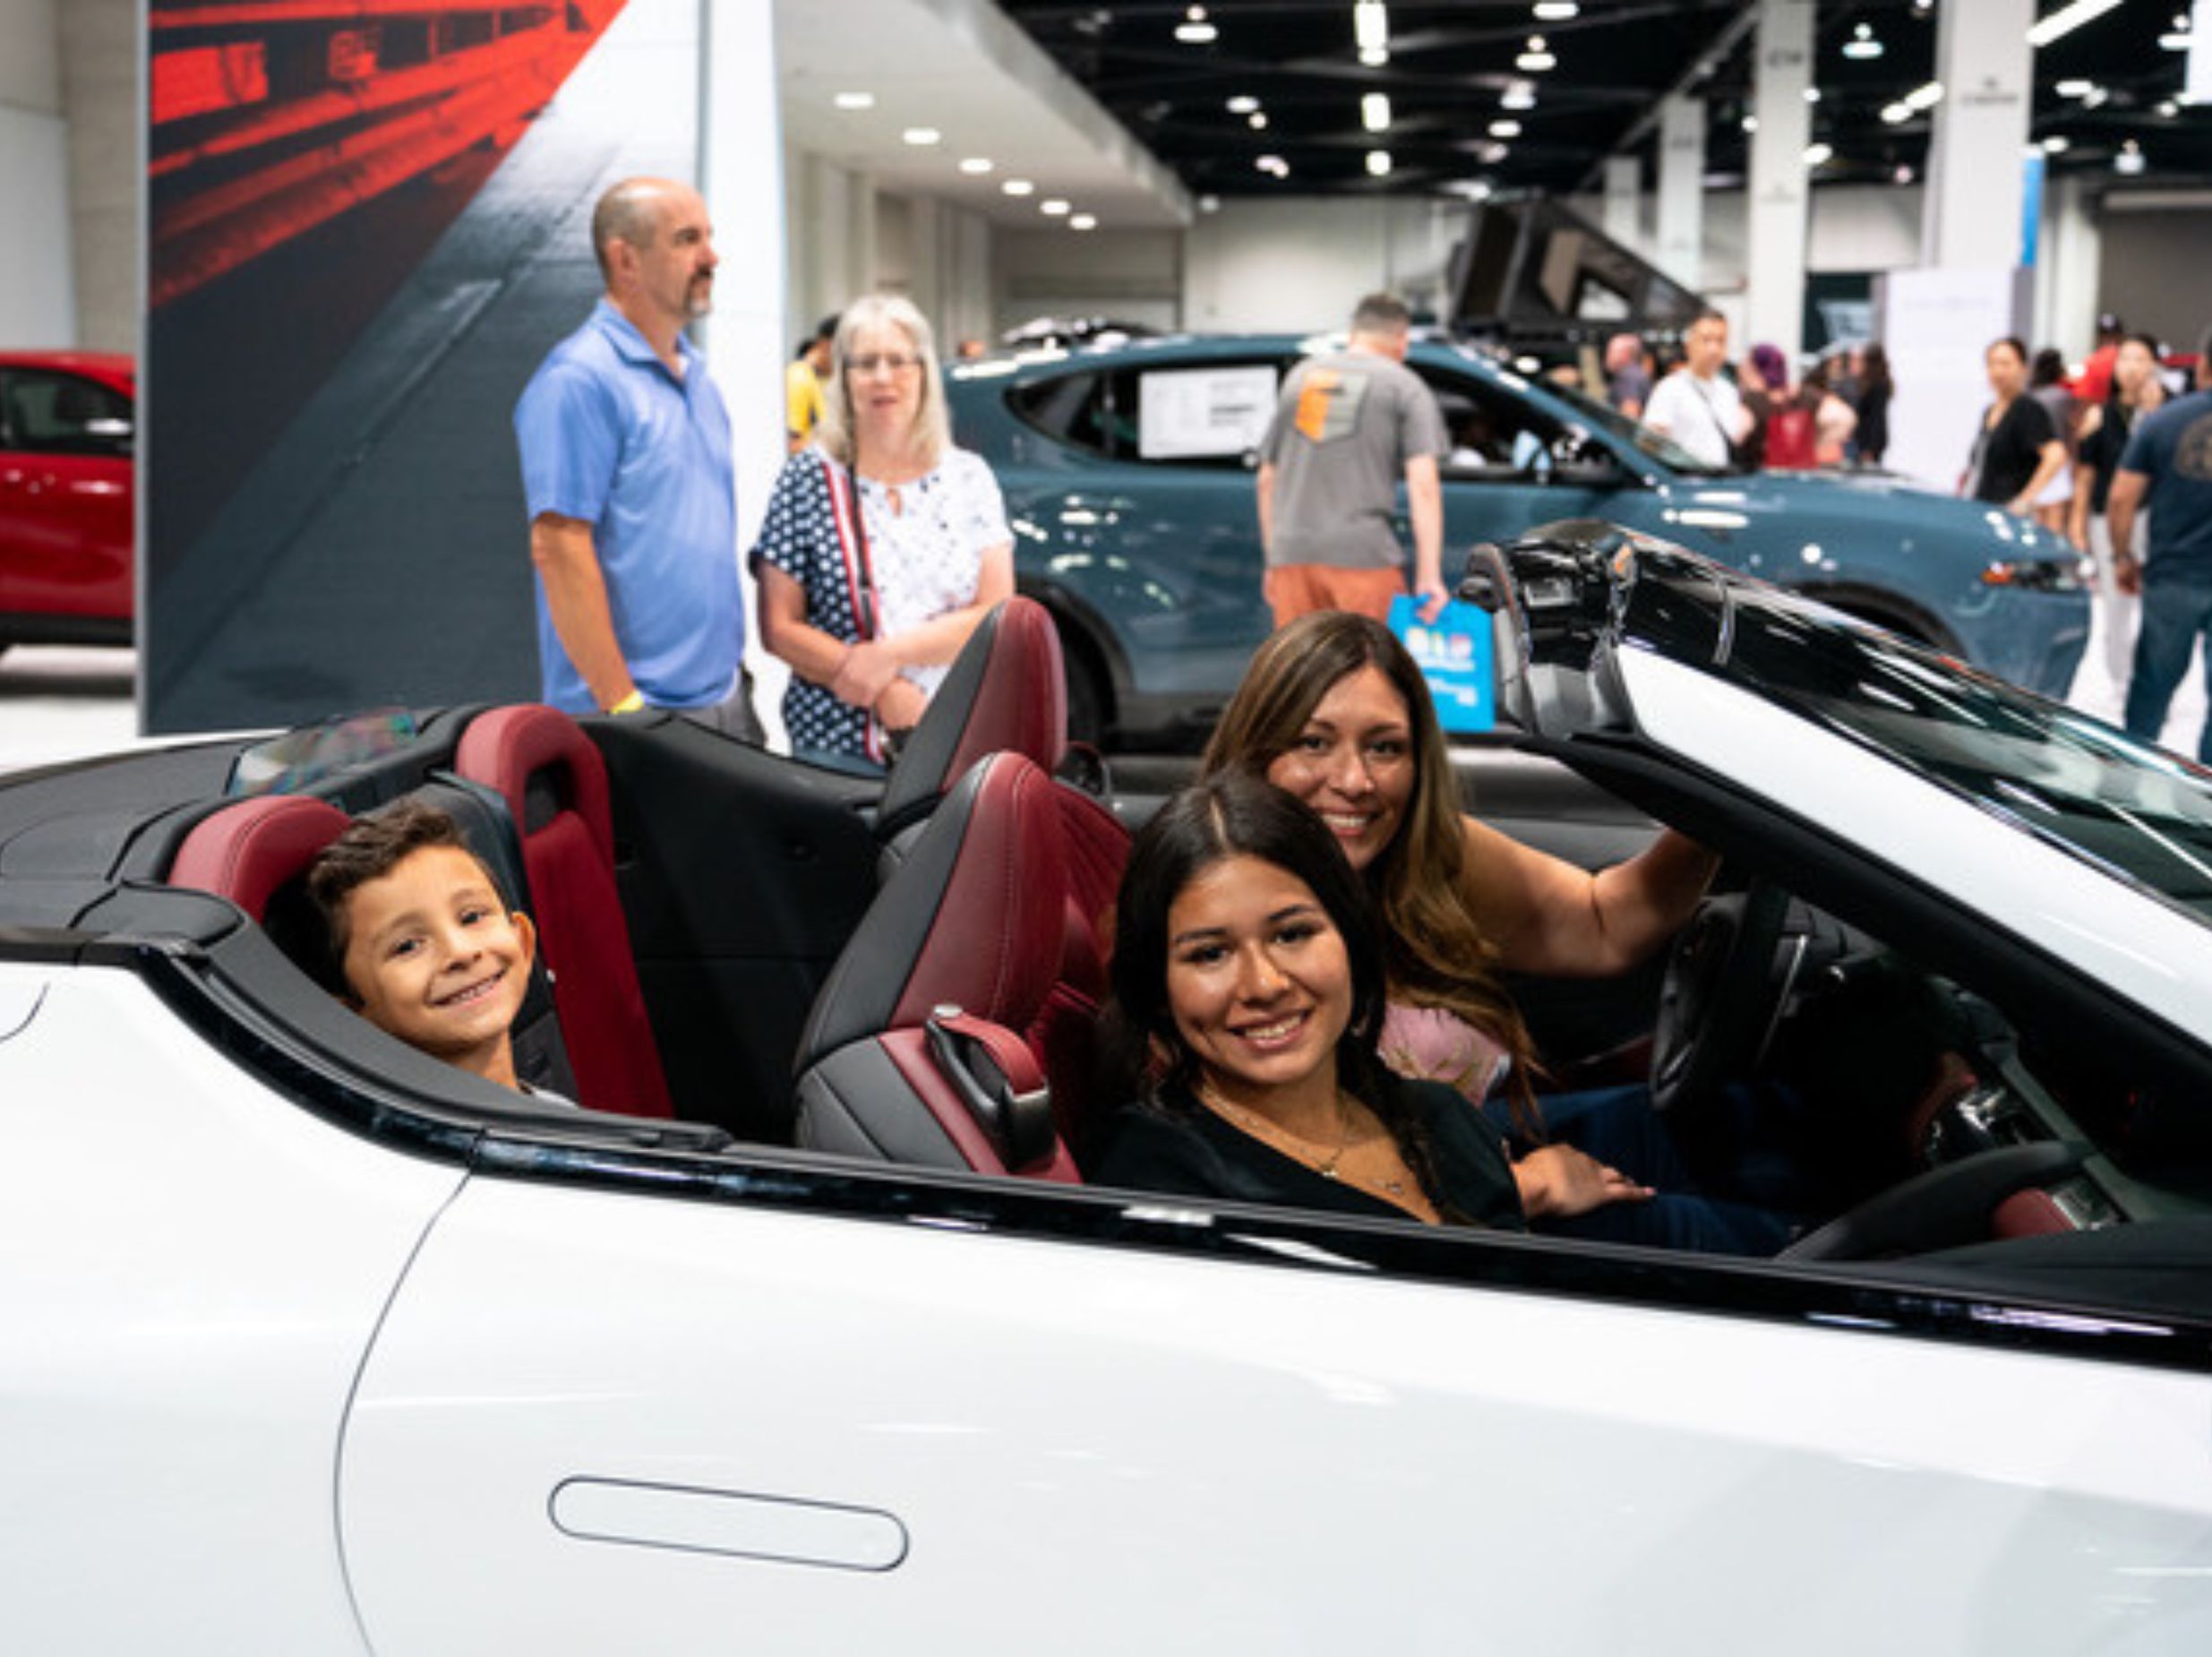 The Utah Auto Expo is just around the corner. Get ready!